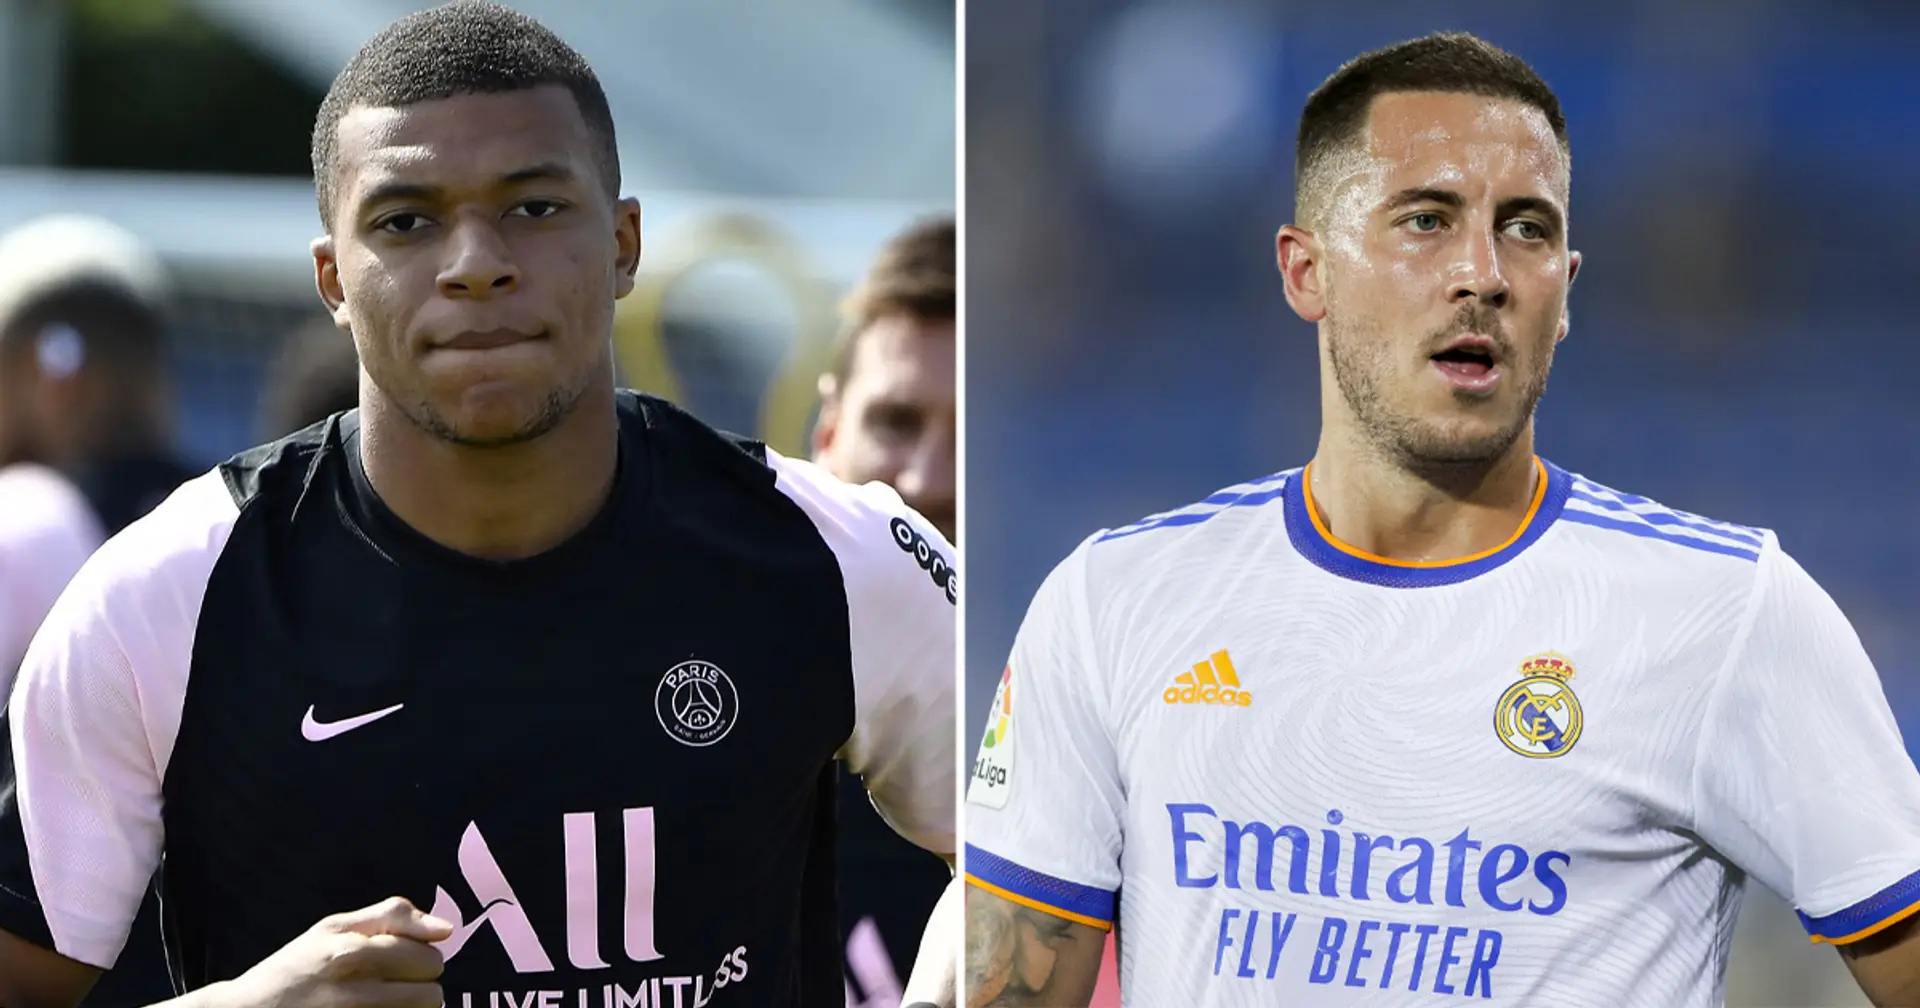 'He might turn out to be a new Hazard': LFC fan explains why Mbappe should change his mind about preferred next club